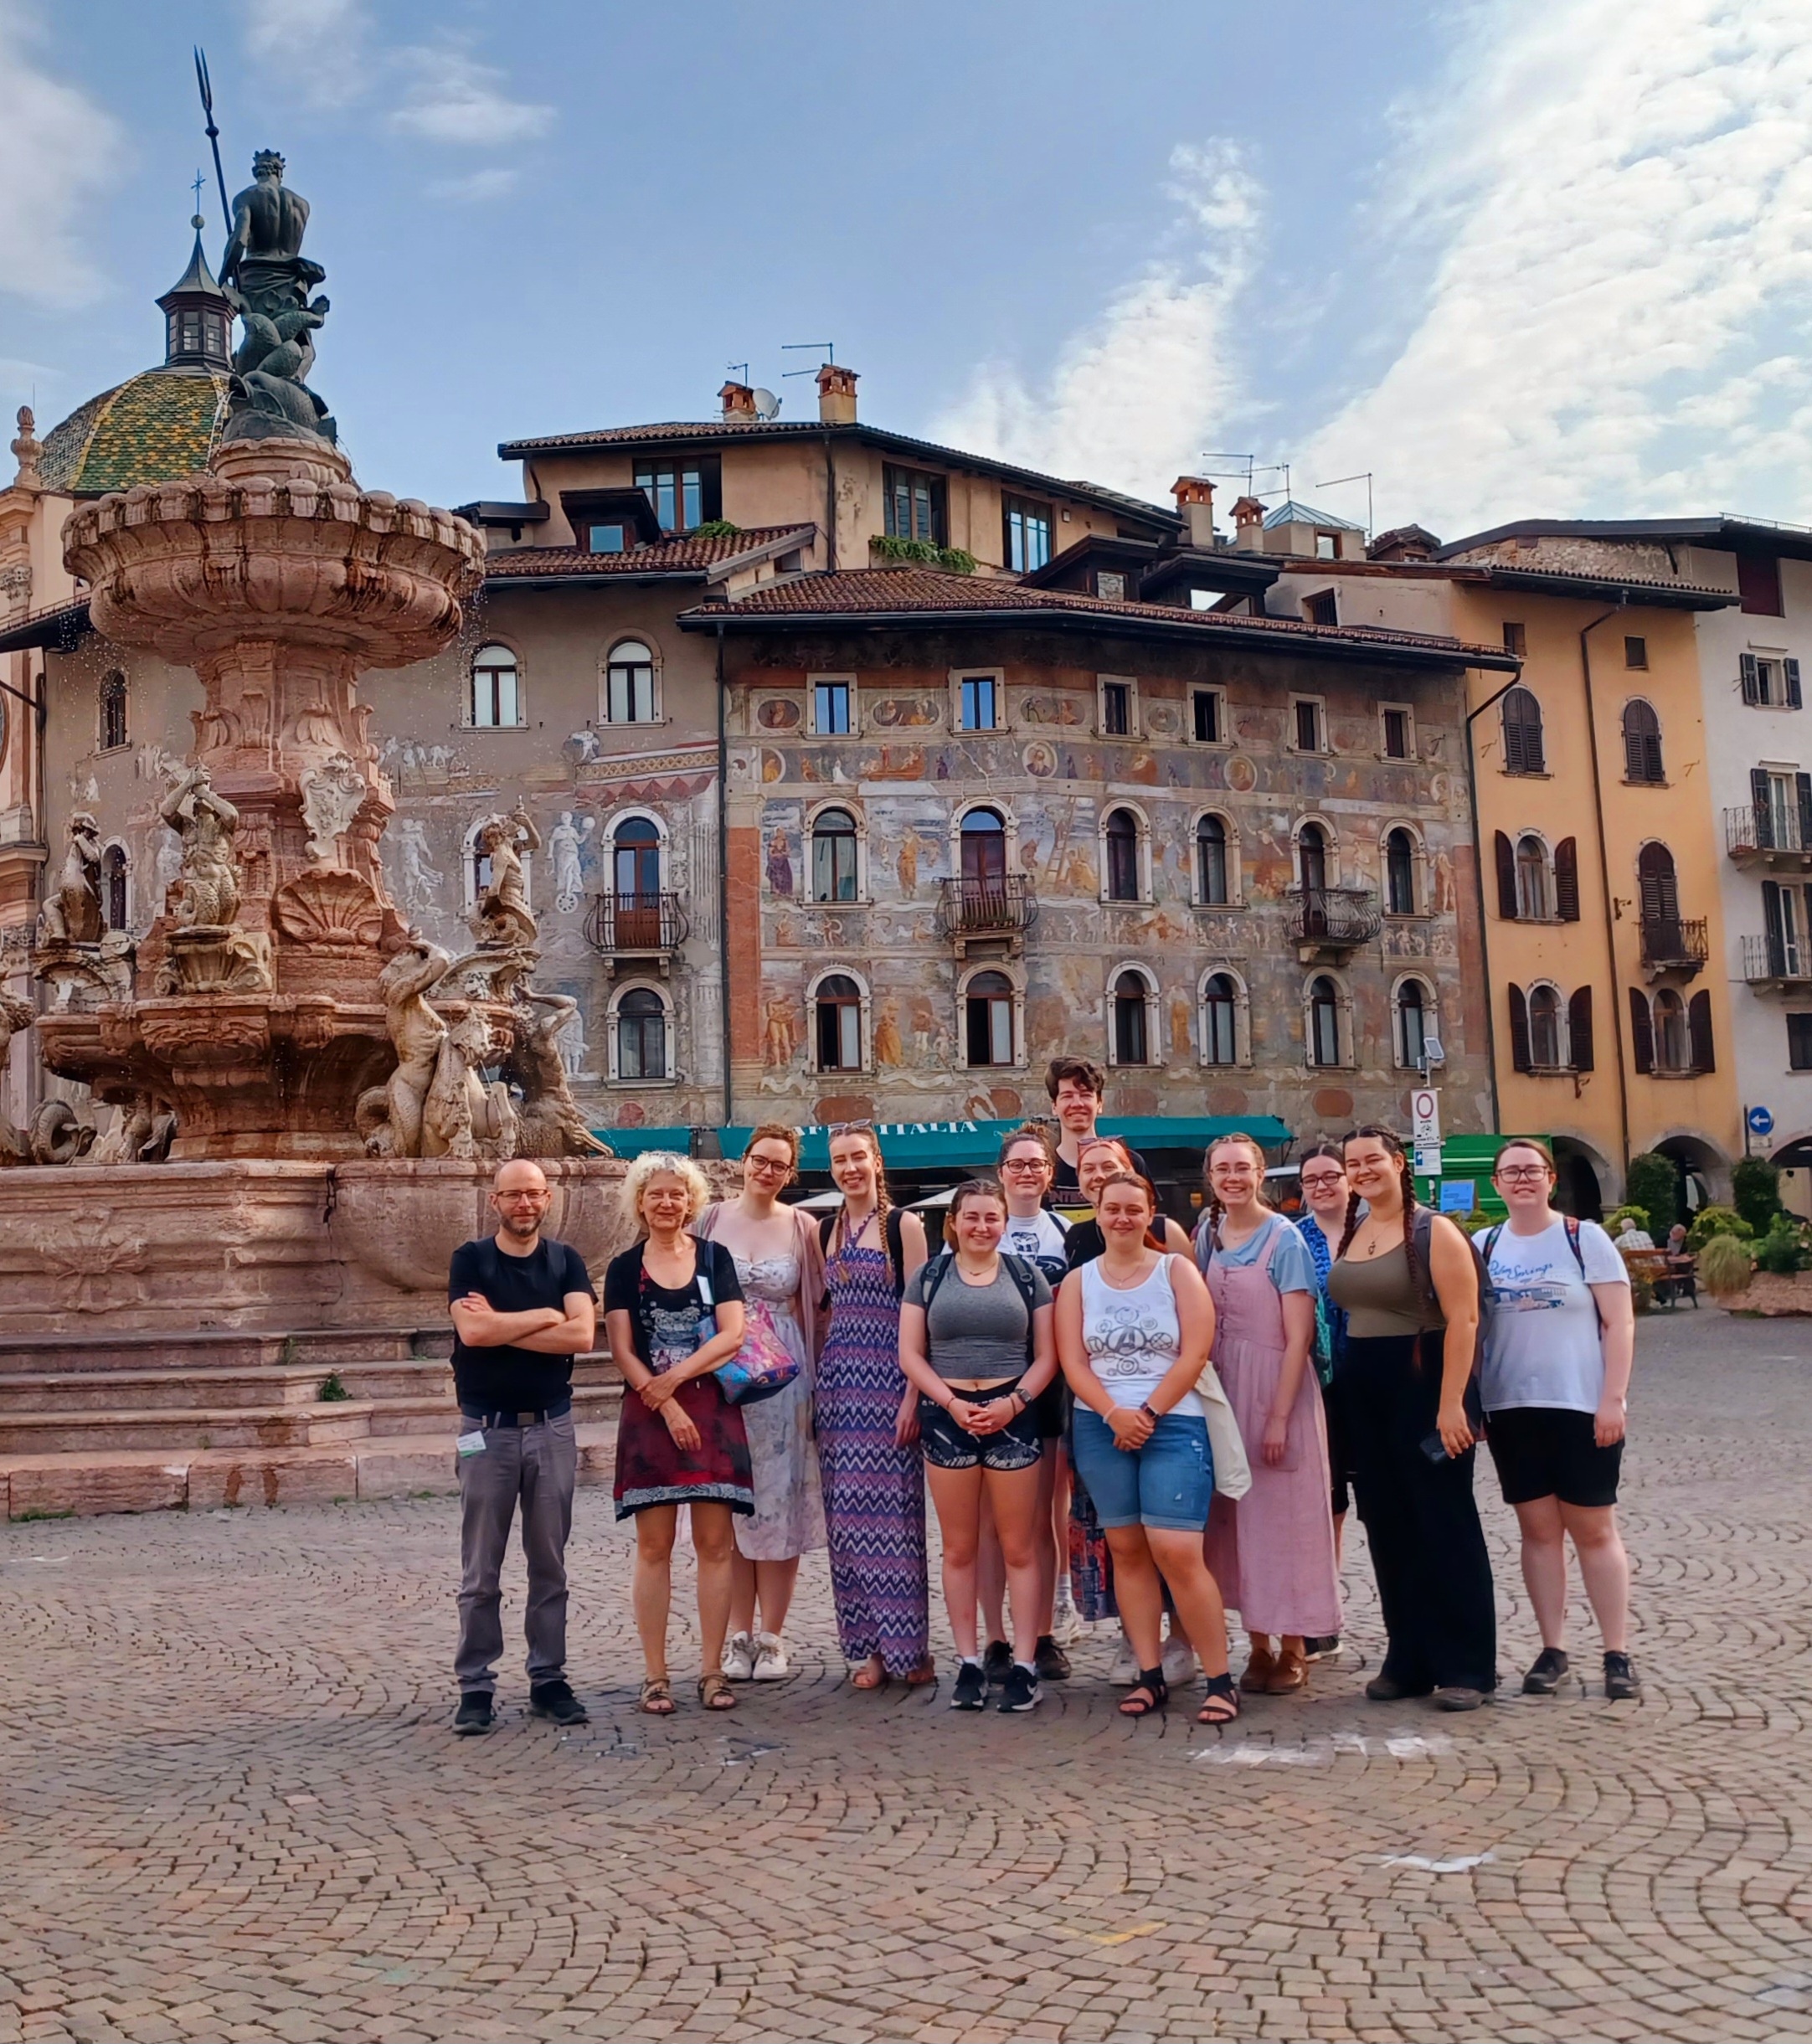 Group photo of 13 smiling people in summer outfits, standing in a piazza in Trento, Italy, adjacent to a large fountain of the Roman god Neptune.